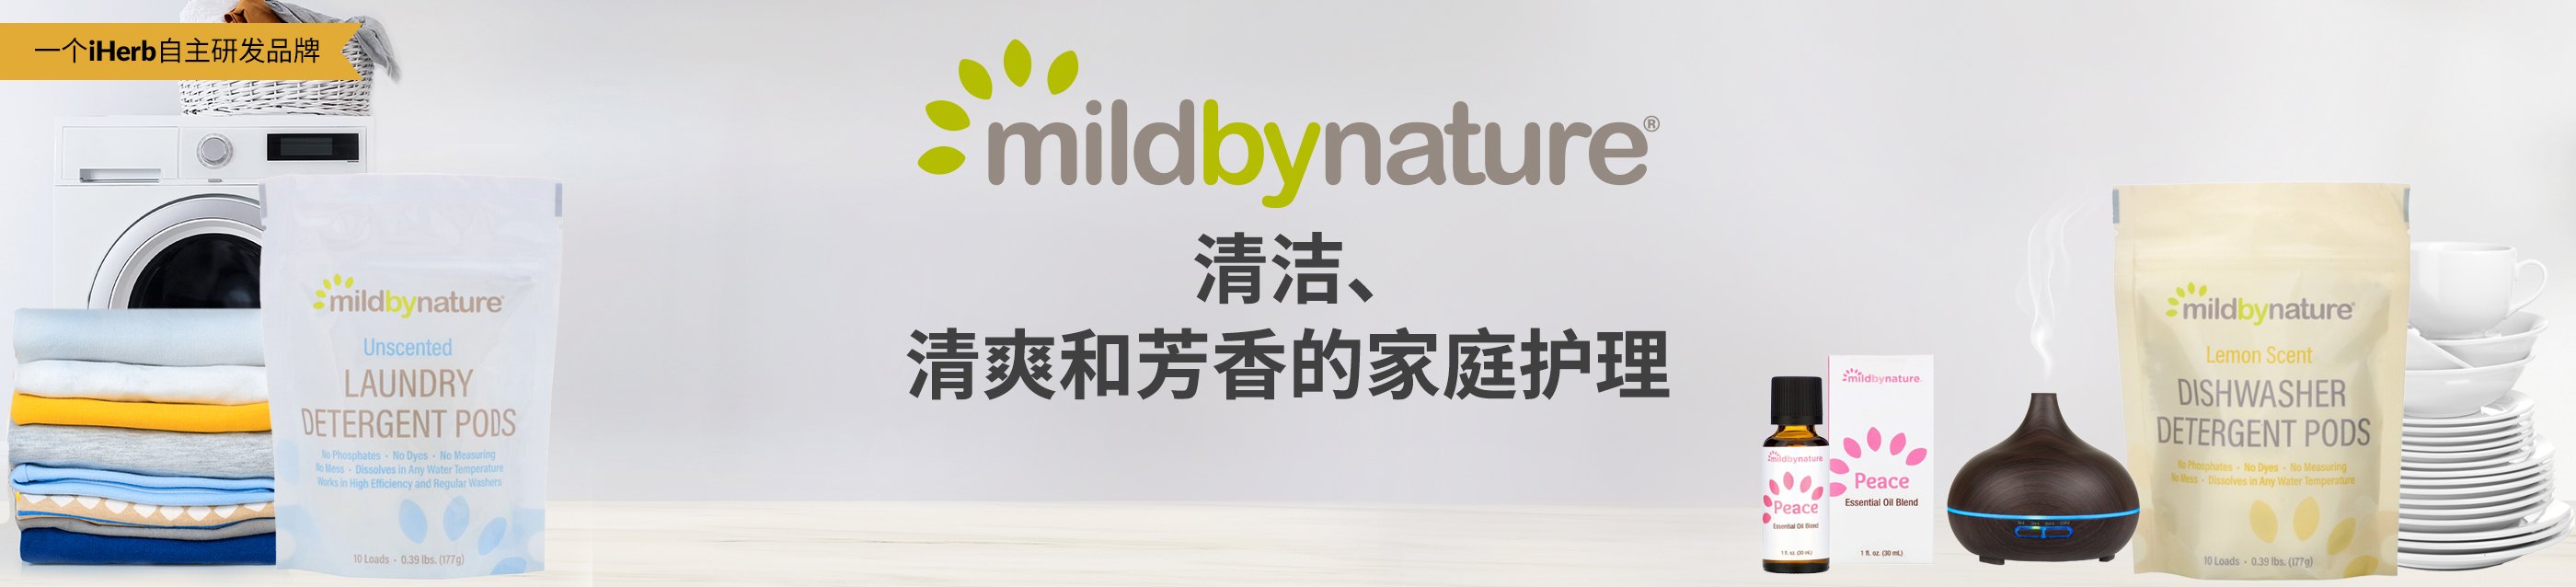 Mild By Nature Home